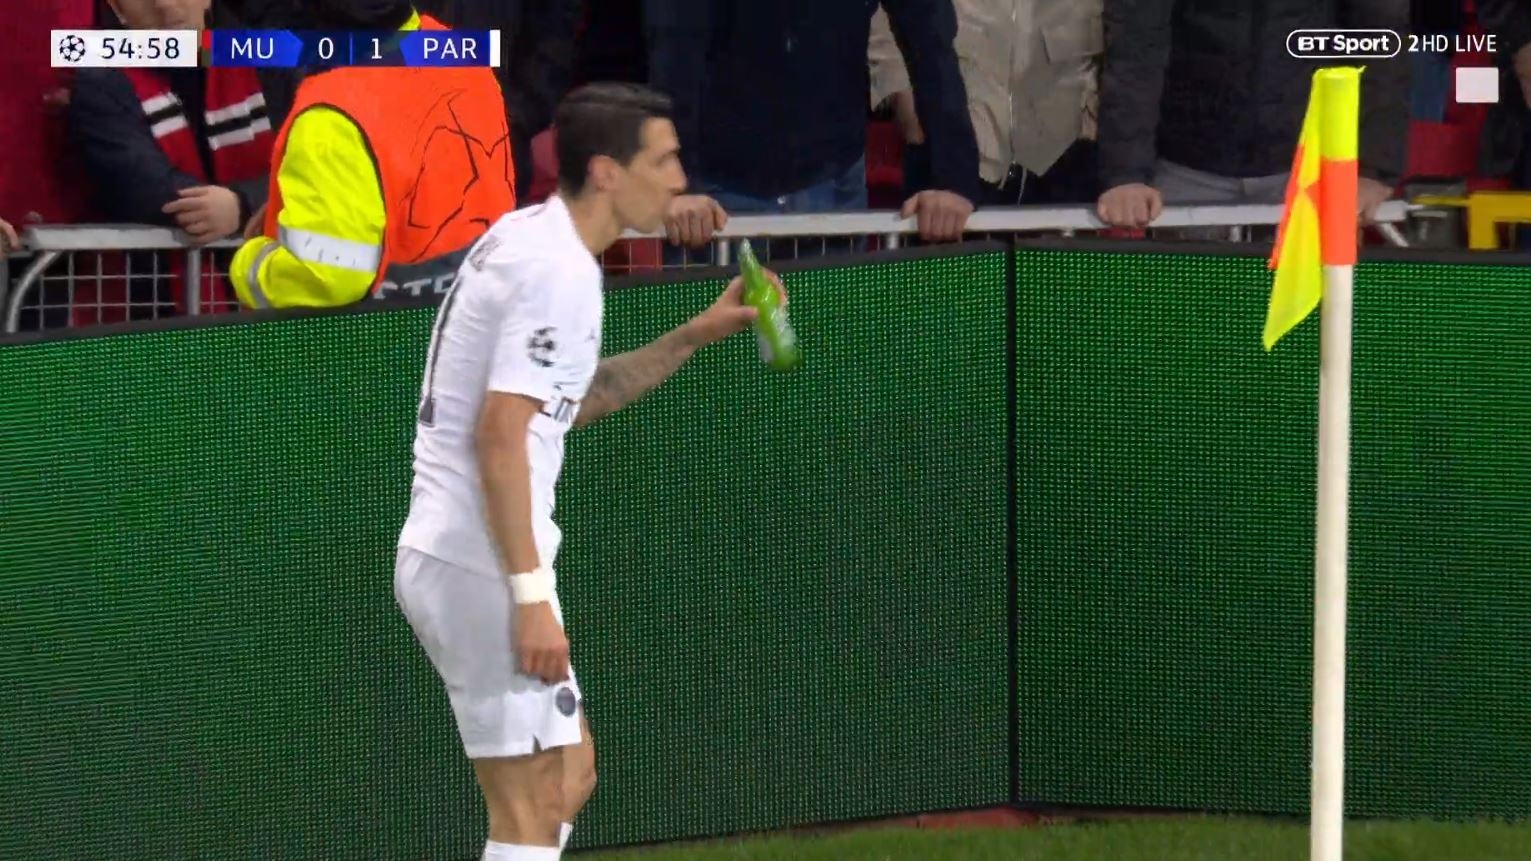 Di Maria went as if to drink from the bottle before handing it to an official